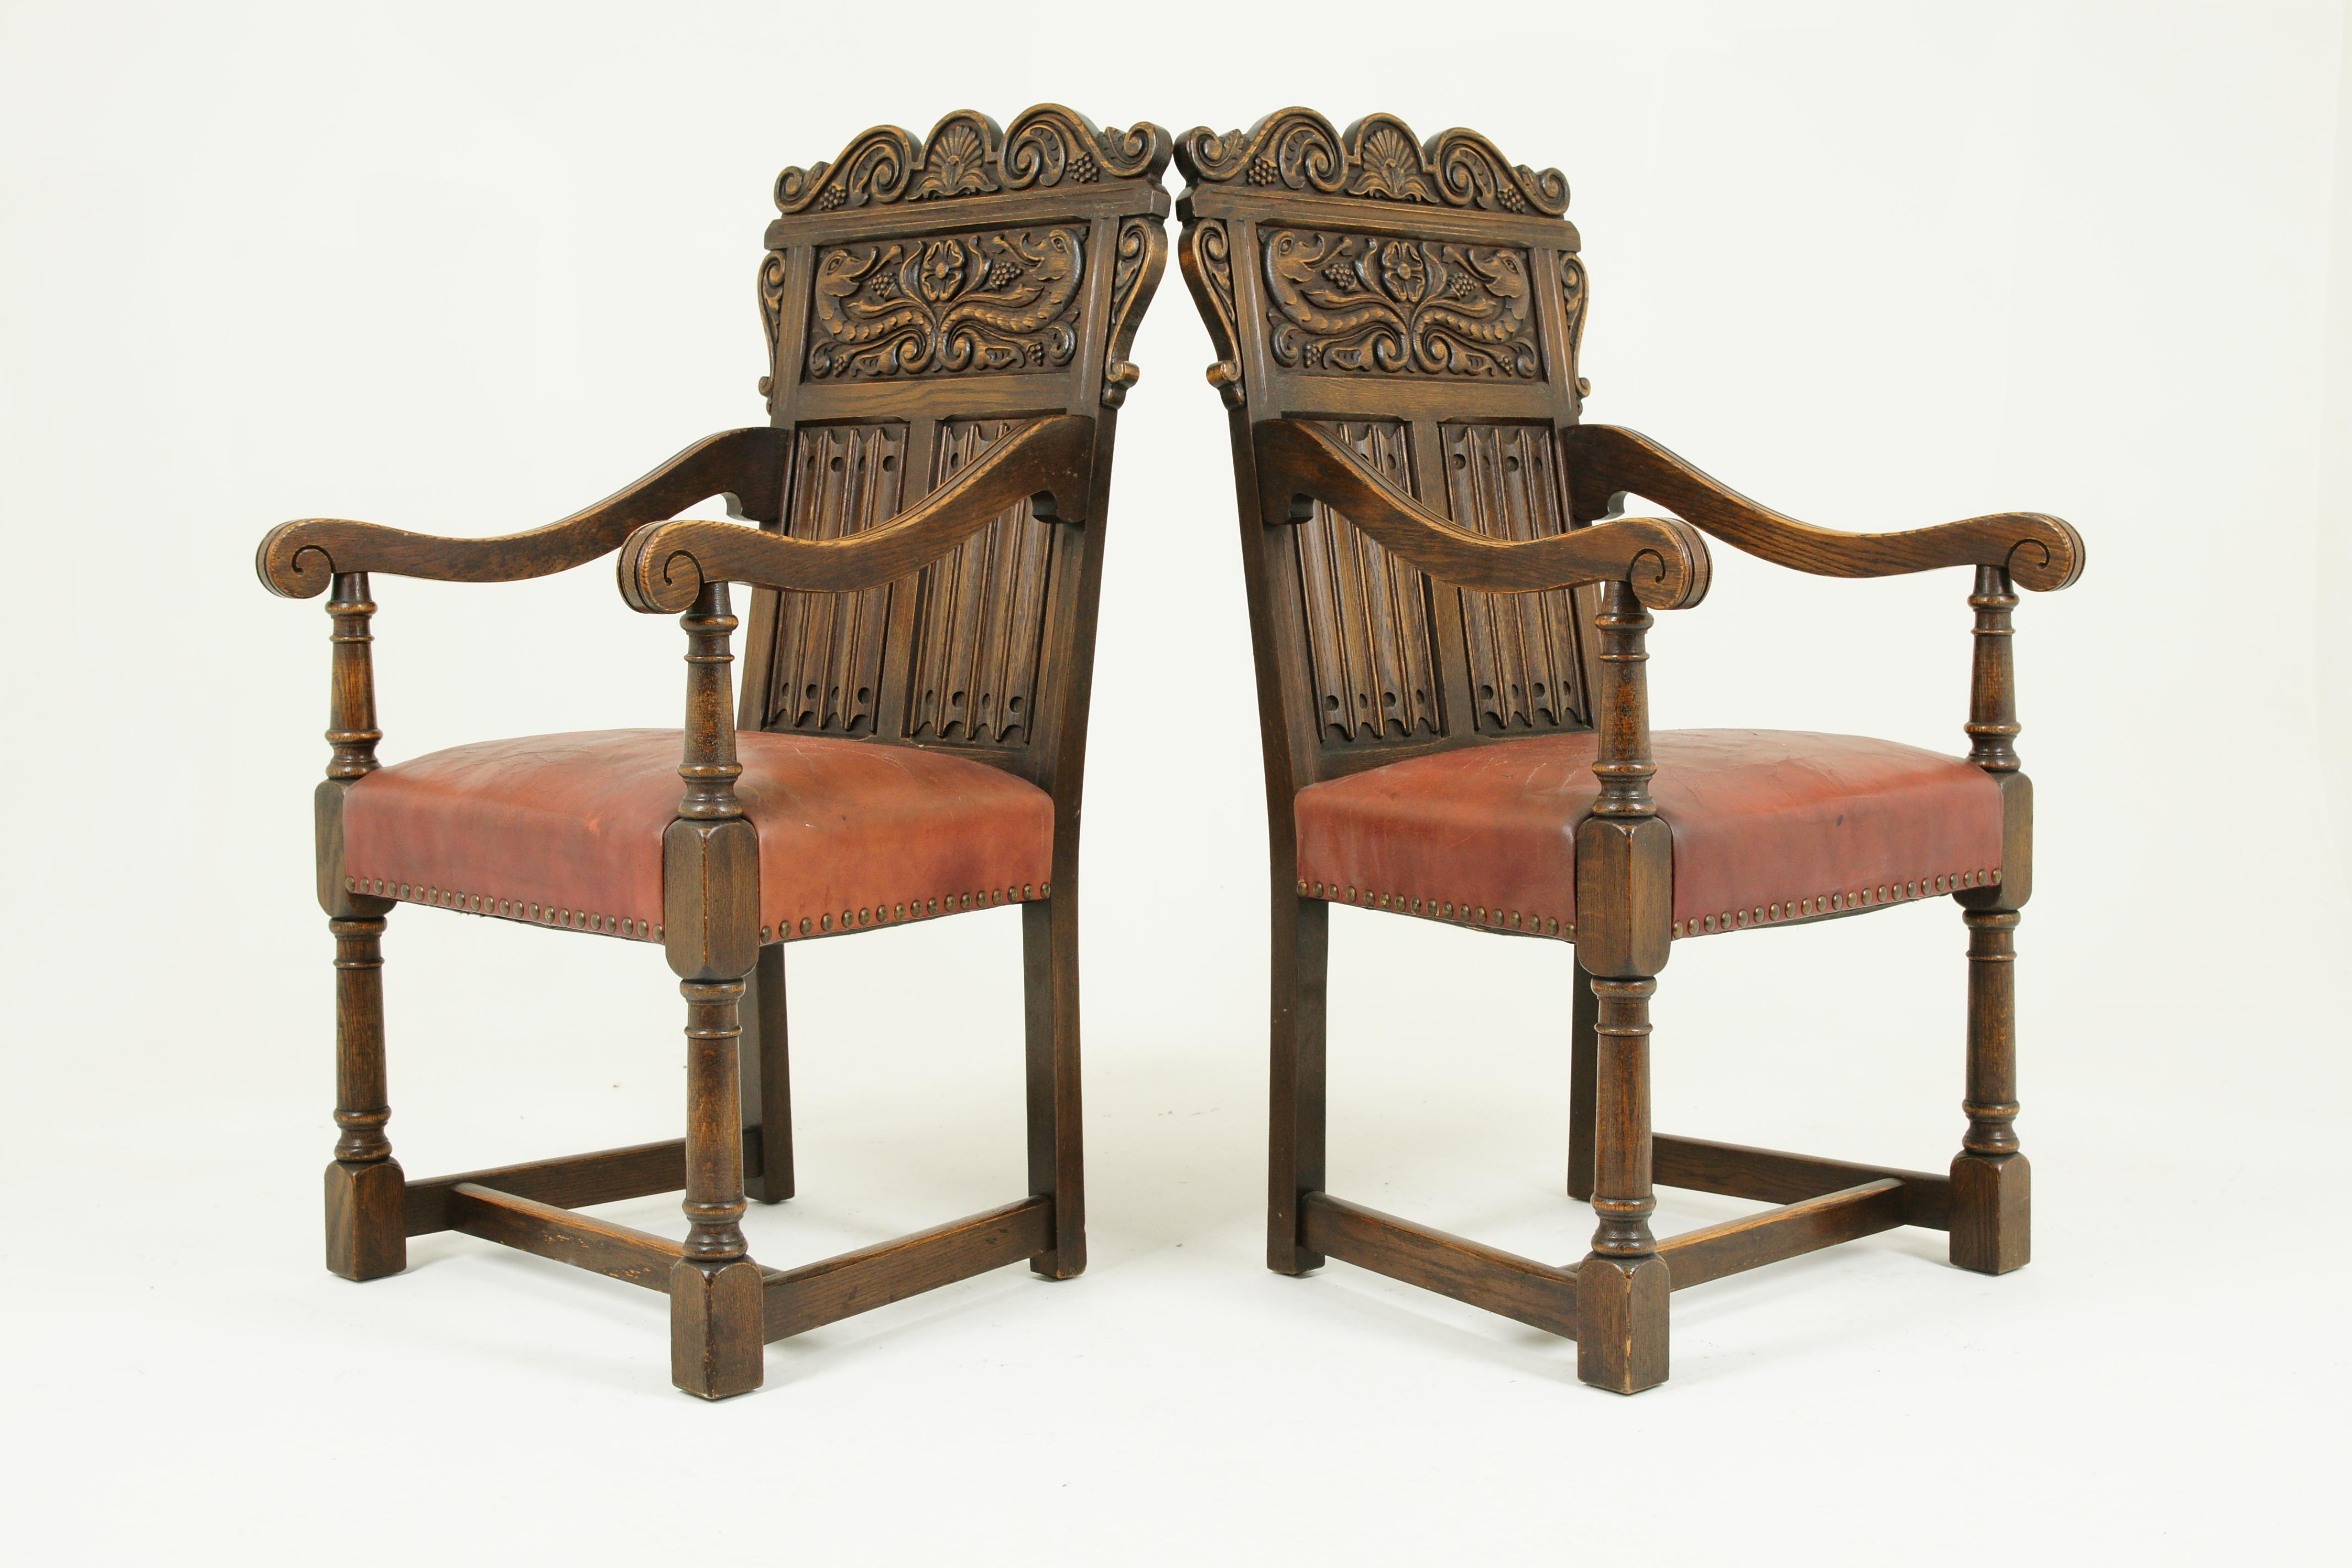 Canadian Antique Dining Chairs, Renaissance Revival, Oak Chairs, Krug, Canada 1930, B1523